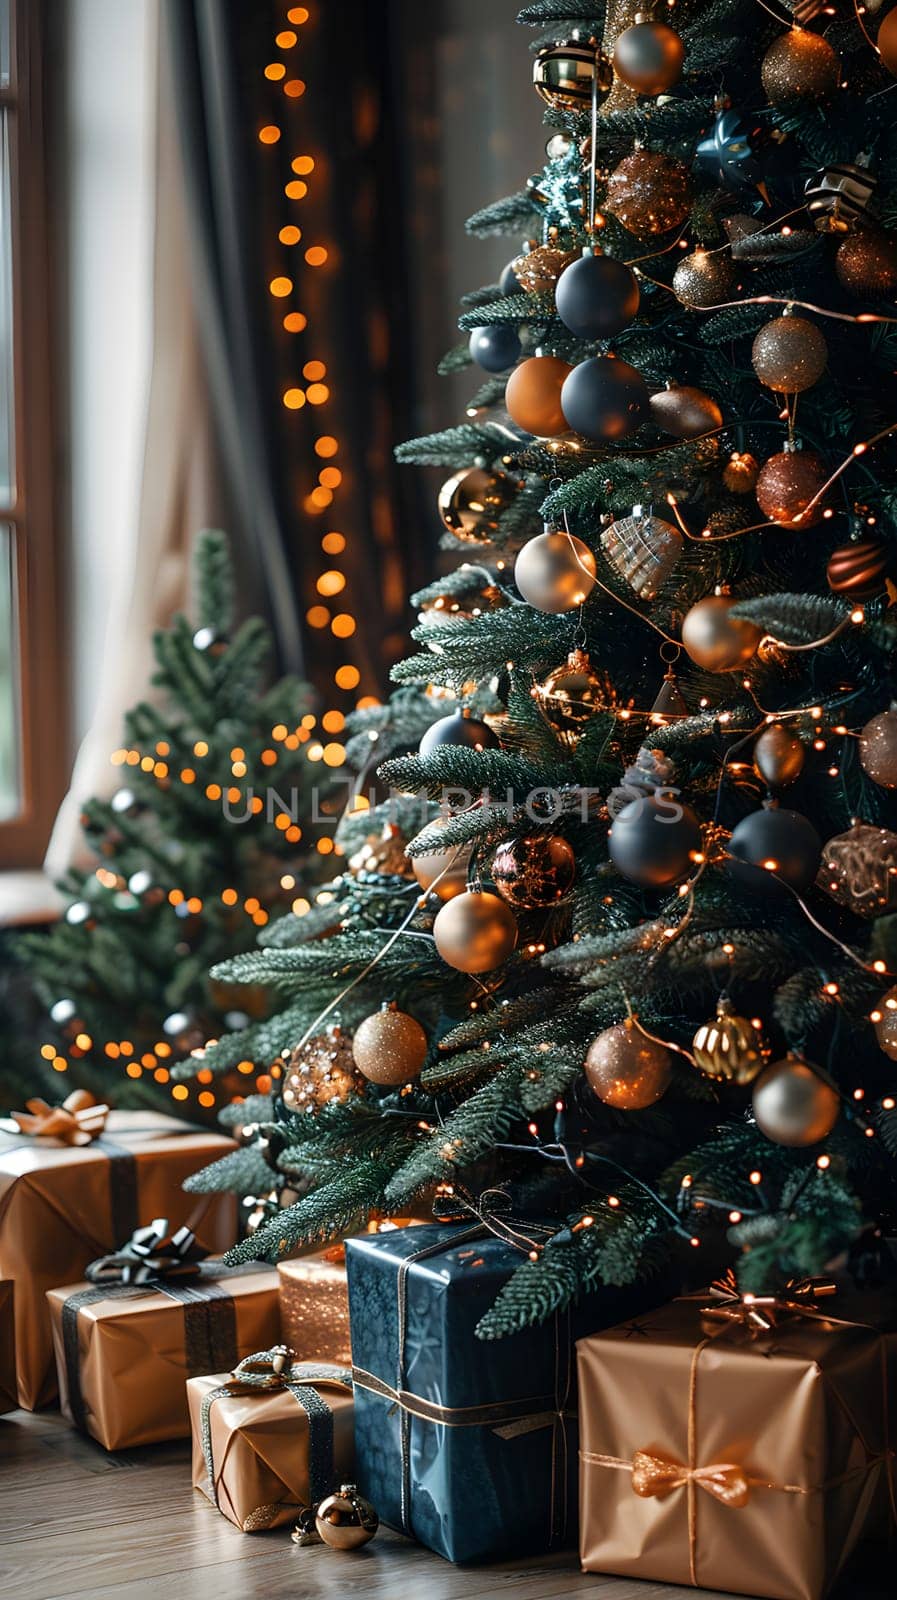 A Christmas tree with gifts and decorations in a festive living room by Nadtochiy